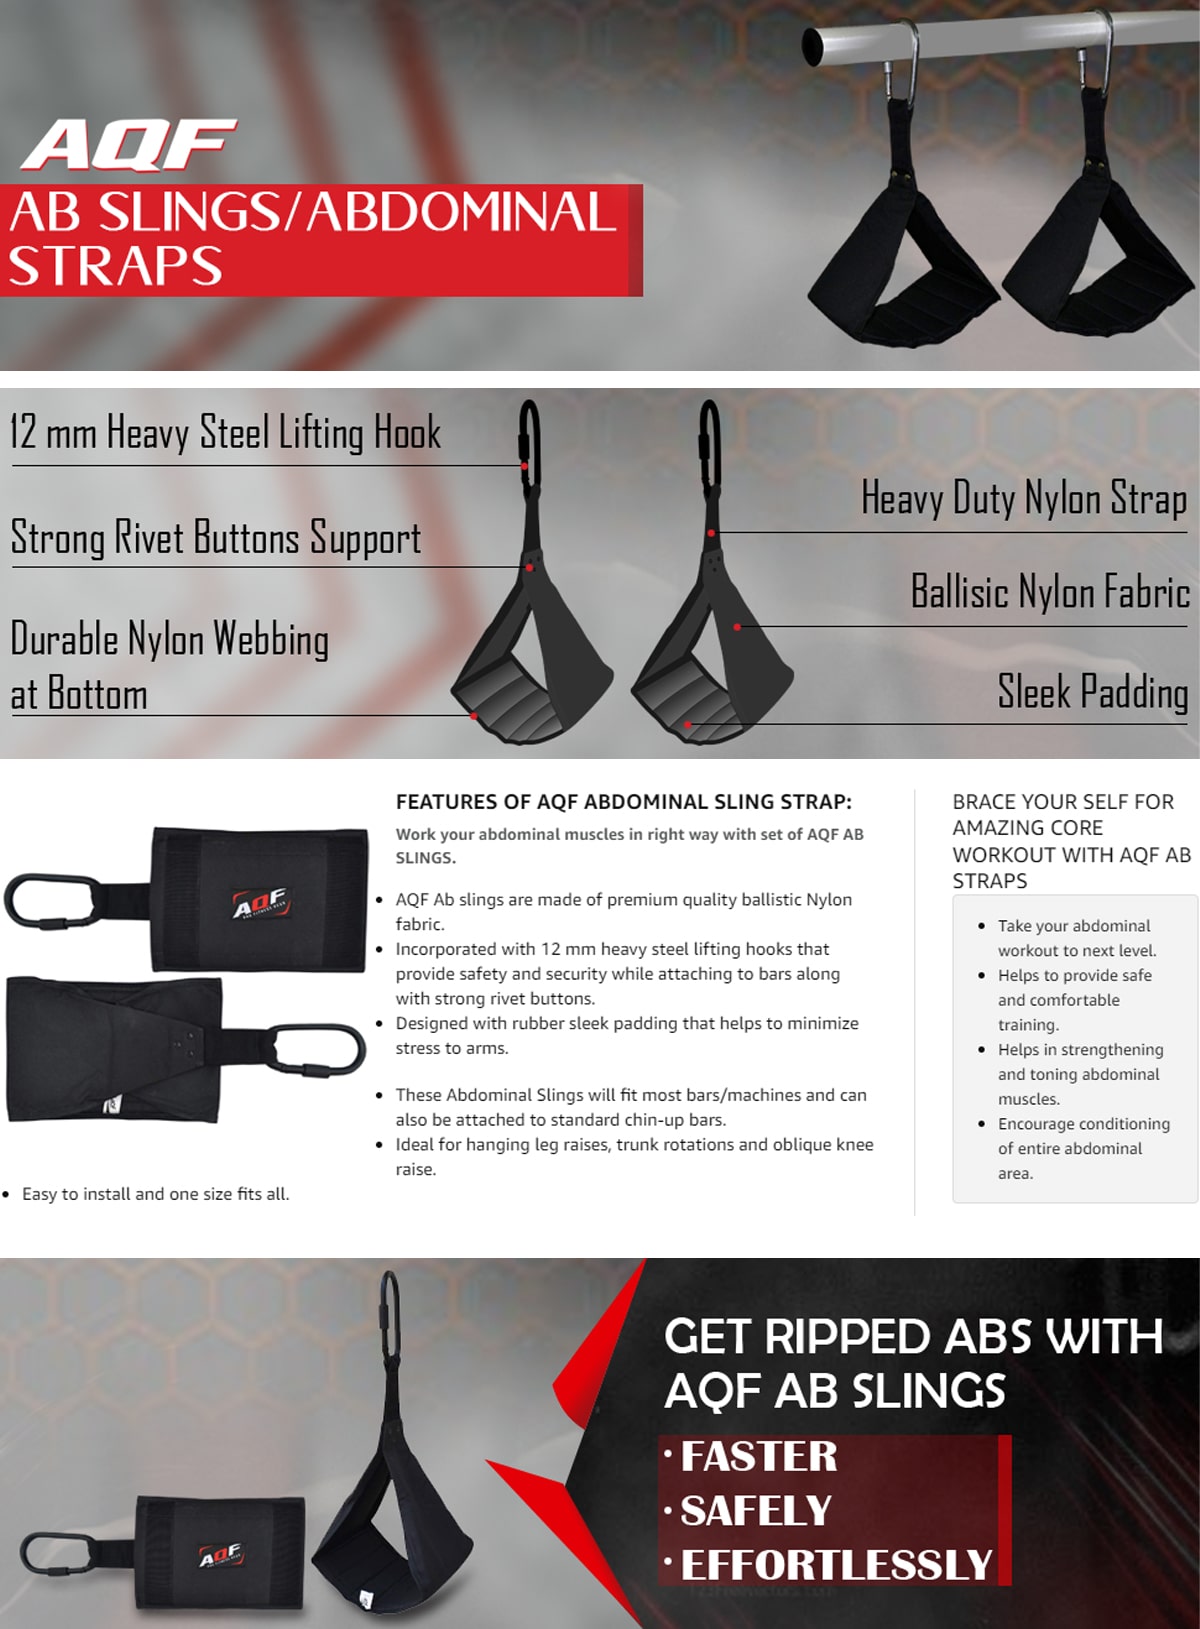 Features of AQF Abdominal Sling Strap